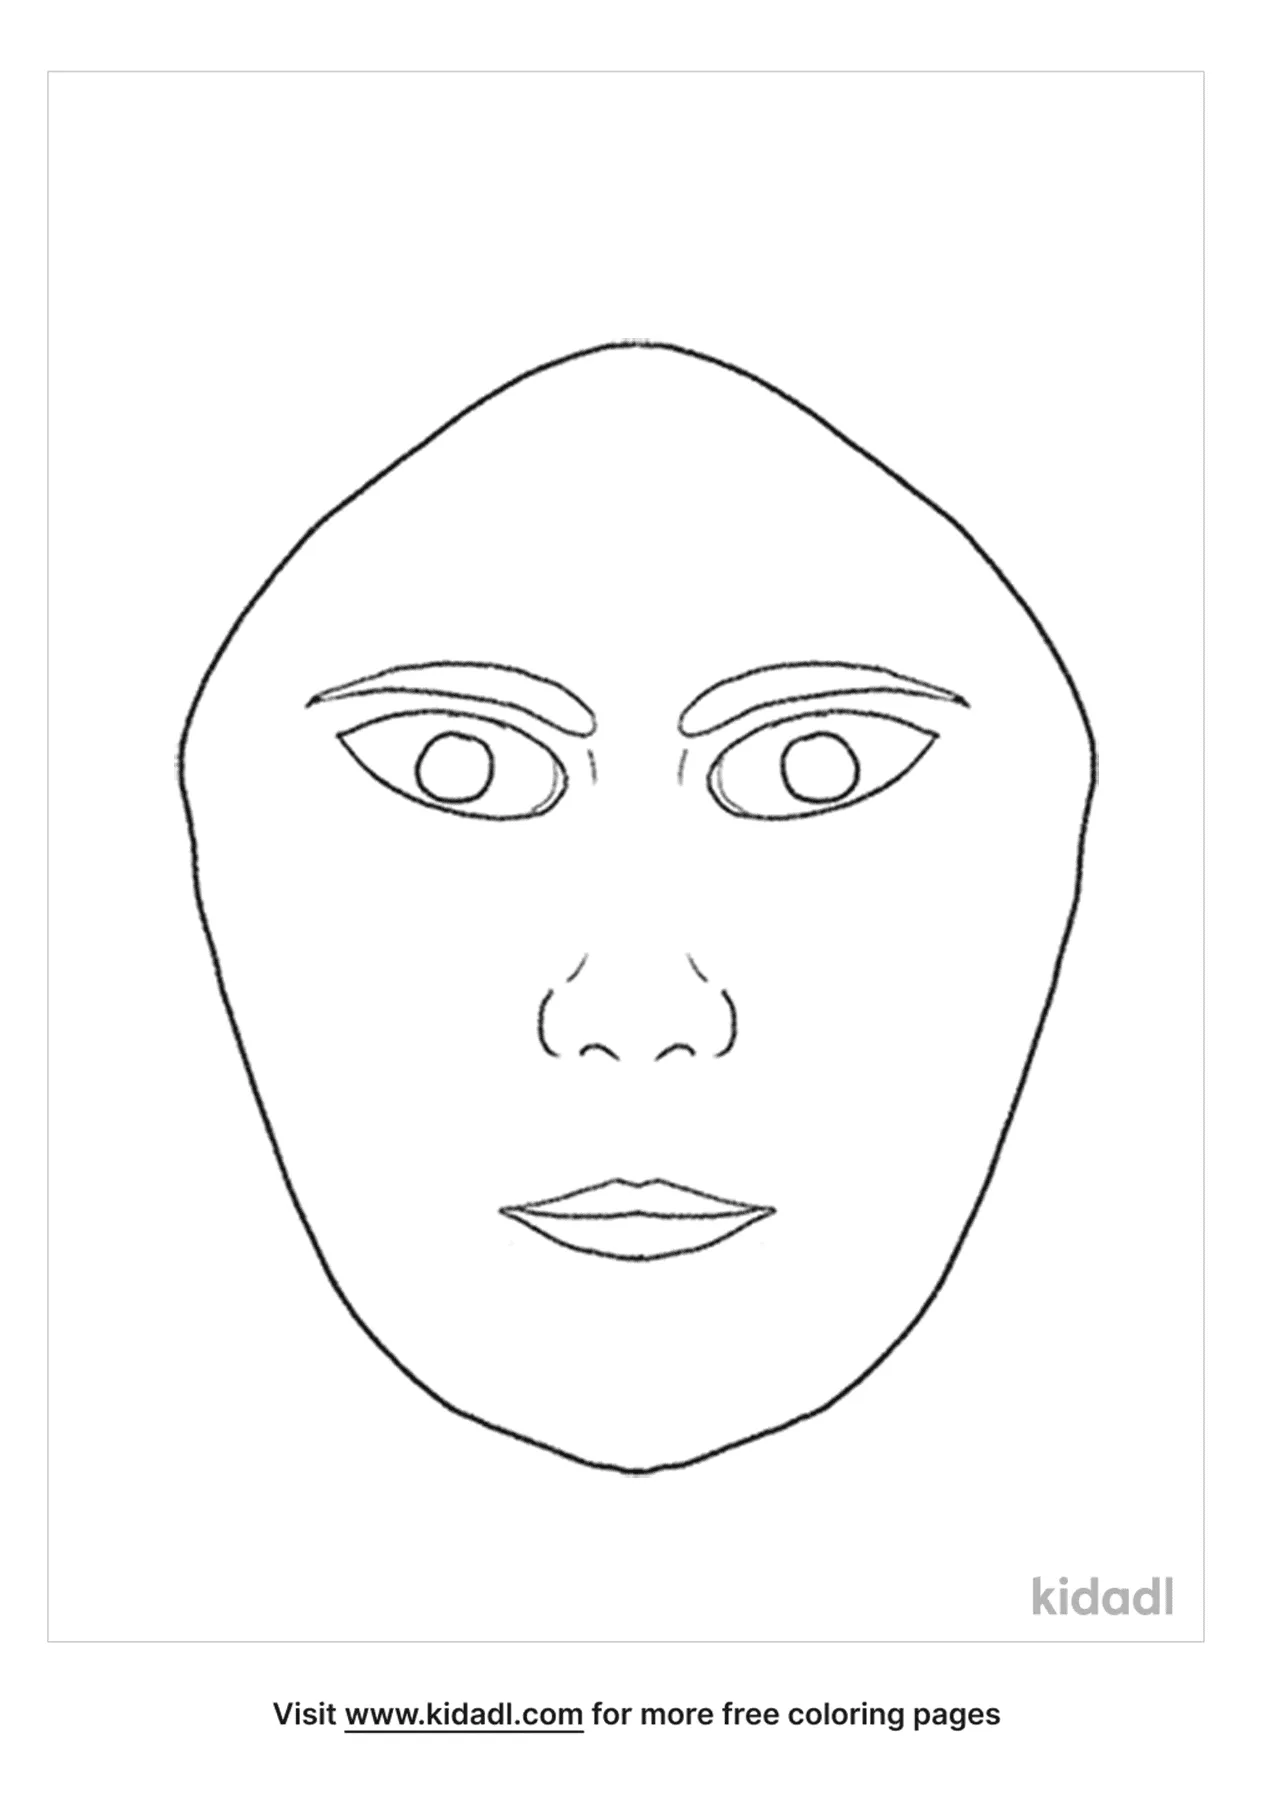 Free Makeup Faces Coloring Page Coloring Page Printables Kidadl